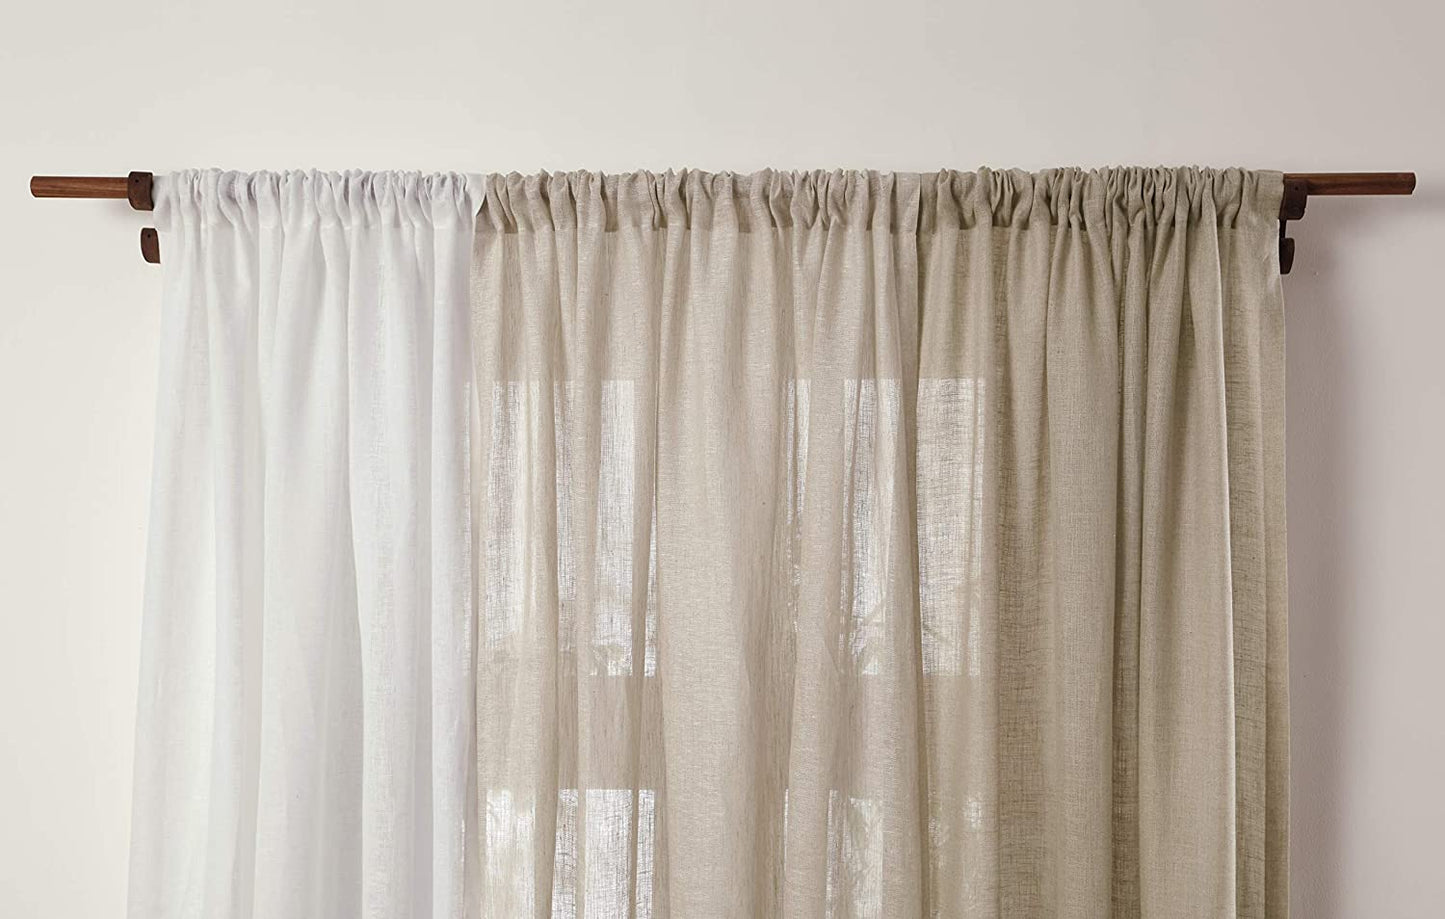 Solino Home Linen Sheer Curtain – 52 X 45 Inch Light Natural Rod Pocket Window Panel – 100% Pure Natural Fabric Curtain for Living Room, Indoor, Outdoor – Handcrafted from European Flax  Solino Home   